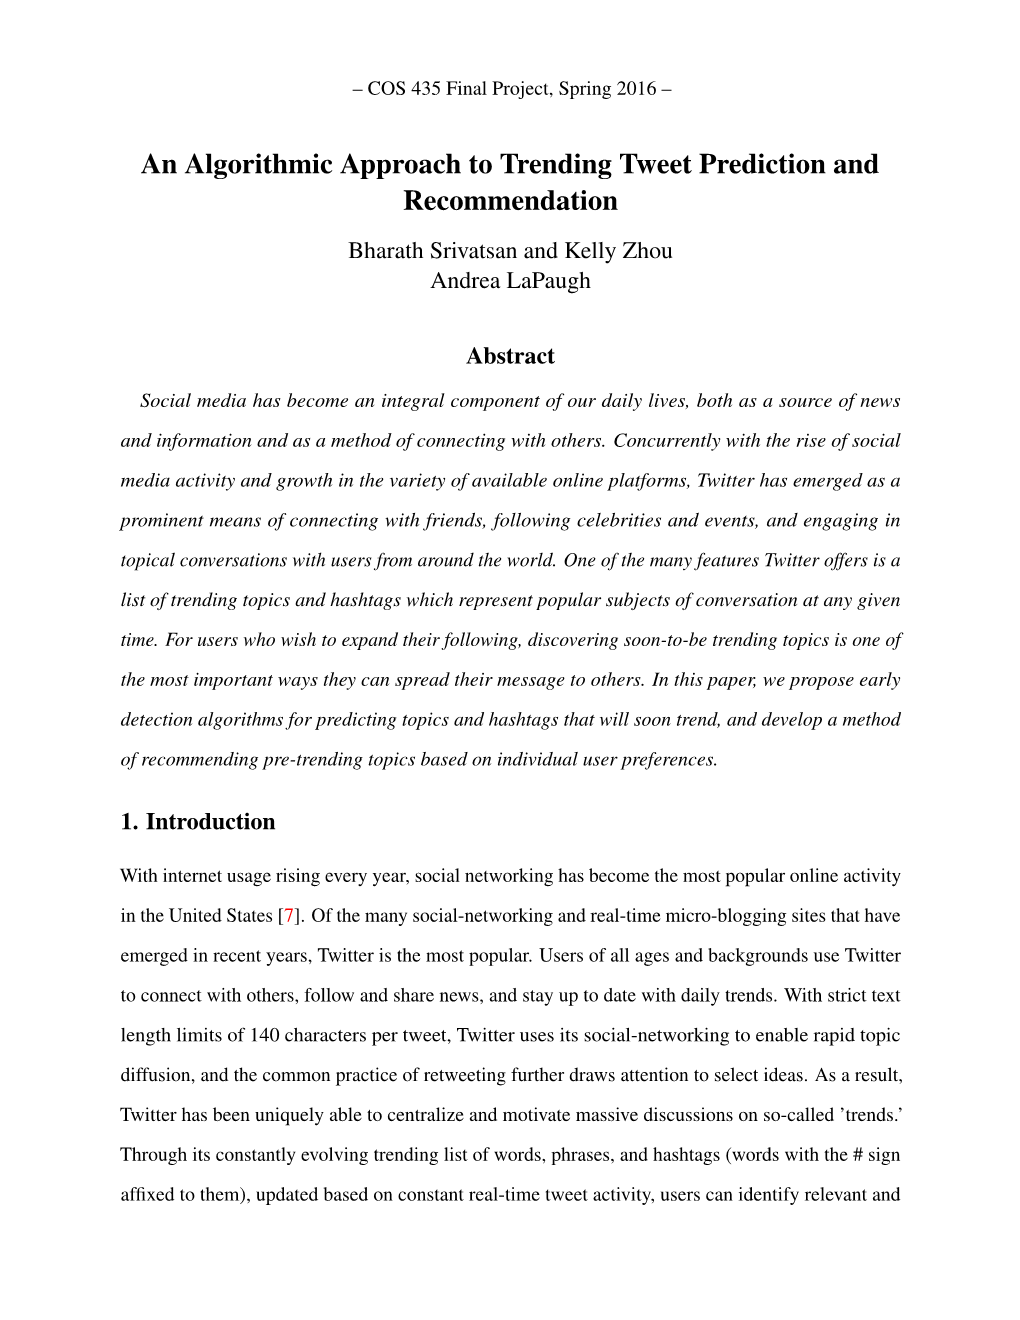 An Algorithmic Approach to Trending Tweet Prediction and Recommendation Bharath Srivatsan and Kelly Zhou Andrea Lapaugh